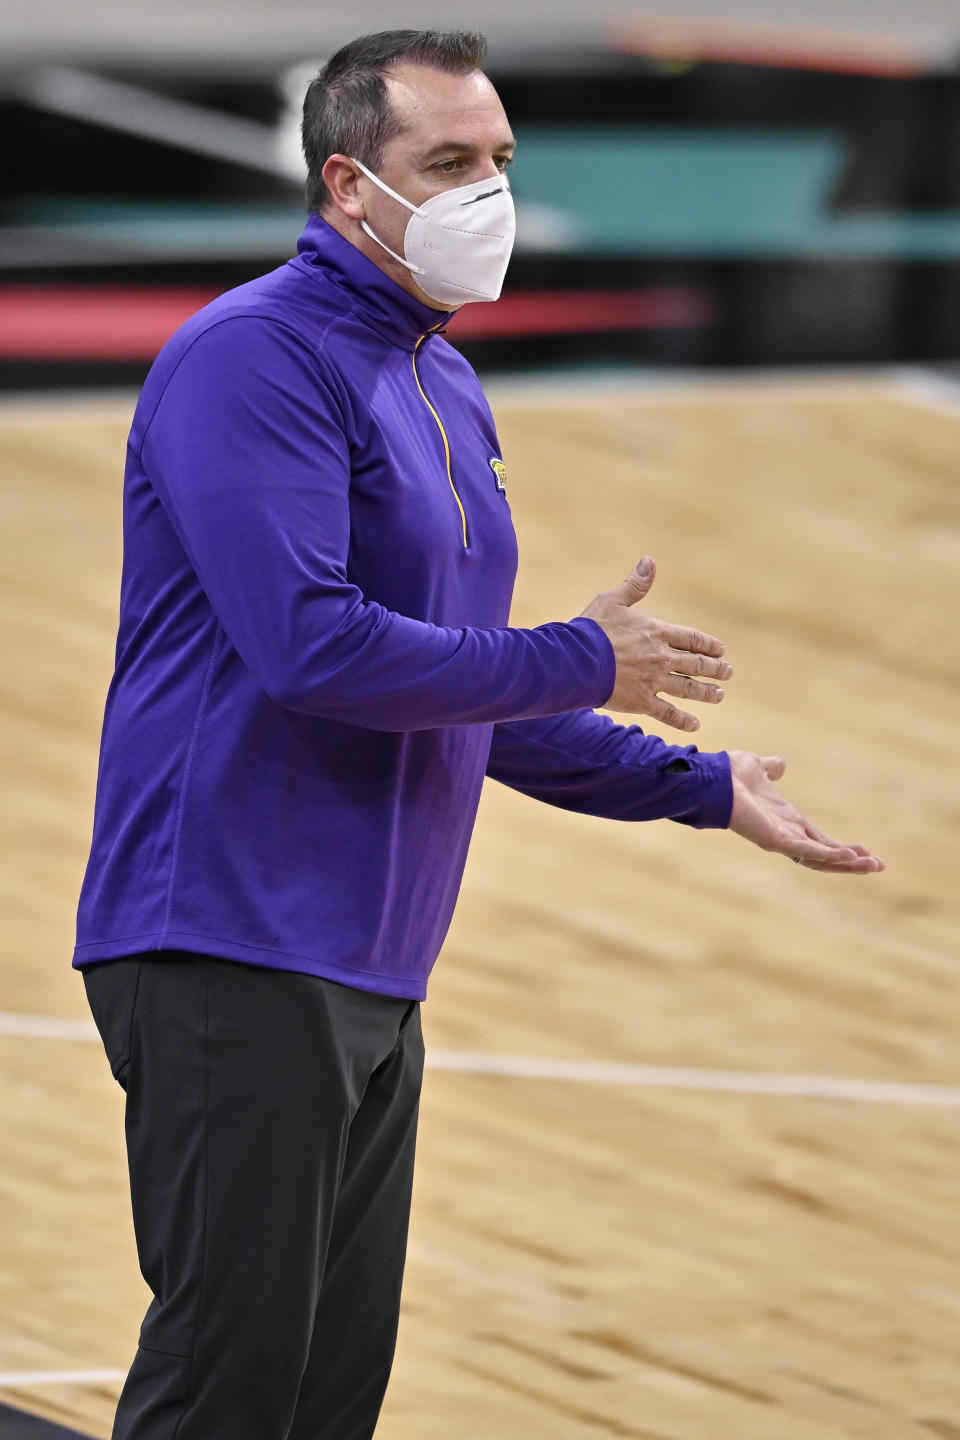 Los Angeles Lakers coach Frank Vogel shouts to his players during the first half of an NBA basketball game against the San Antonio Spurs, Friday, Jan. 1, 2021, in San Antonio. (AP Photo/Darren Abate)